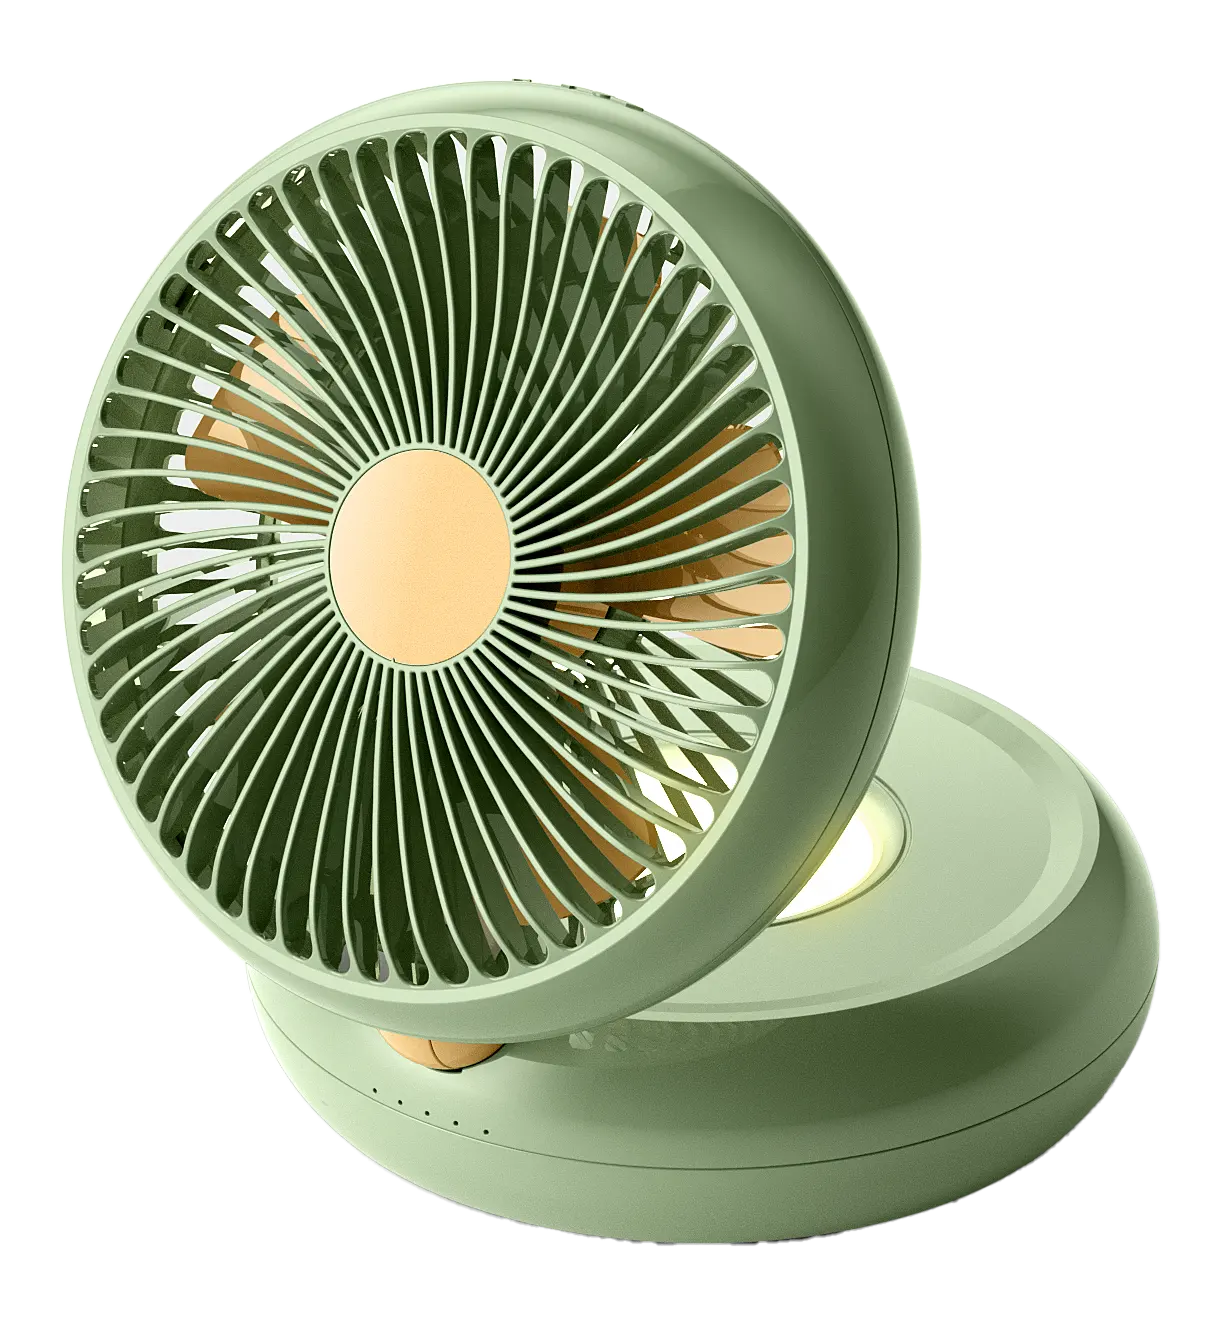 Doughnut New Design Desktop wall-mounted Usb Rechargeable Fan Portable Outdoor Led Camping Light Fans With oscillaiton